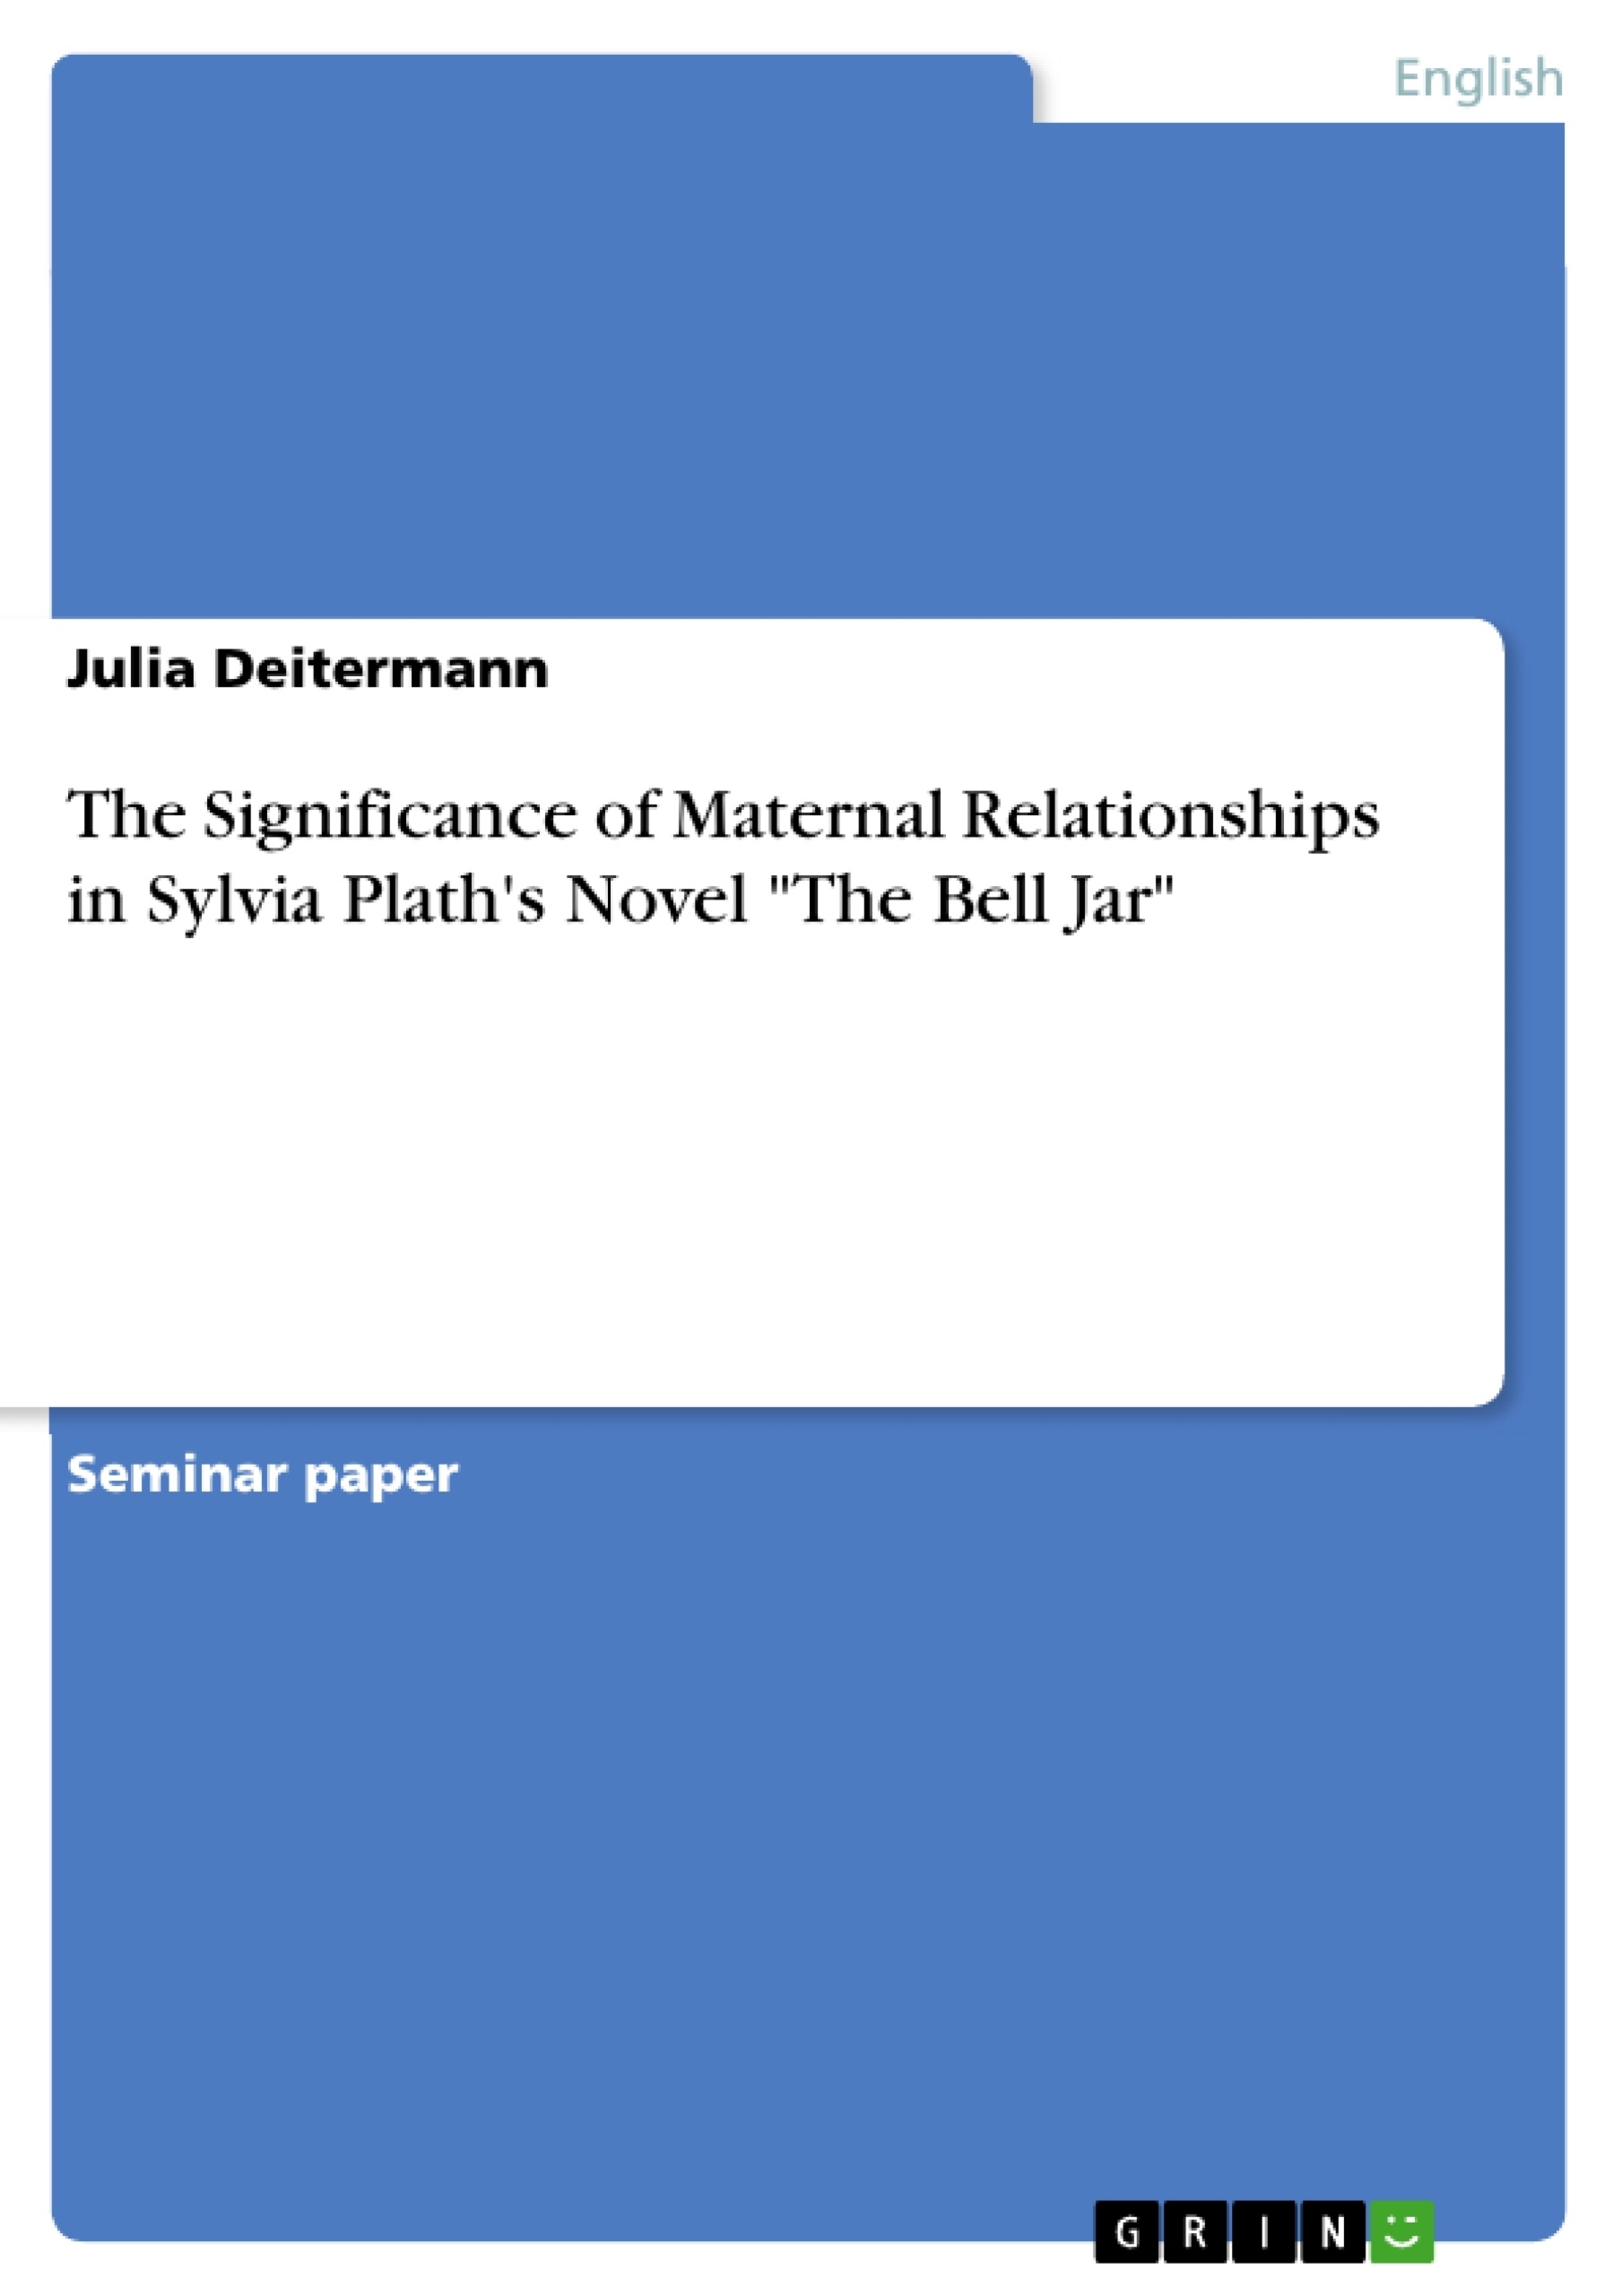 Title: The Significance of Maternal Relationships in Sylvia Plath's Novel "The Bell Jar"